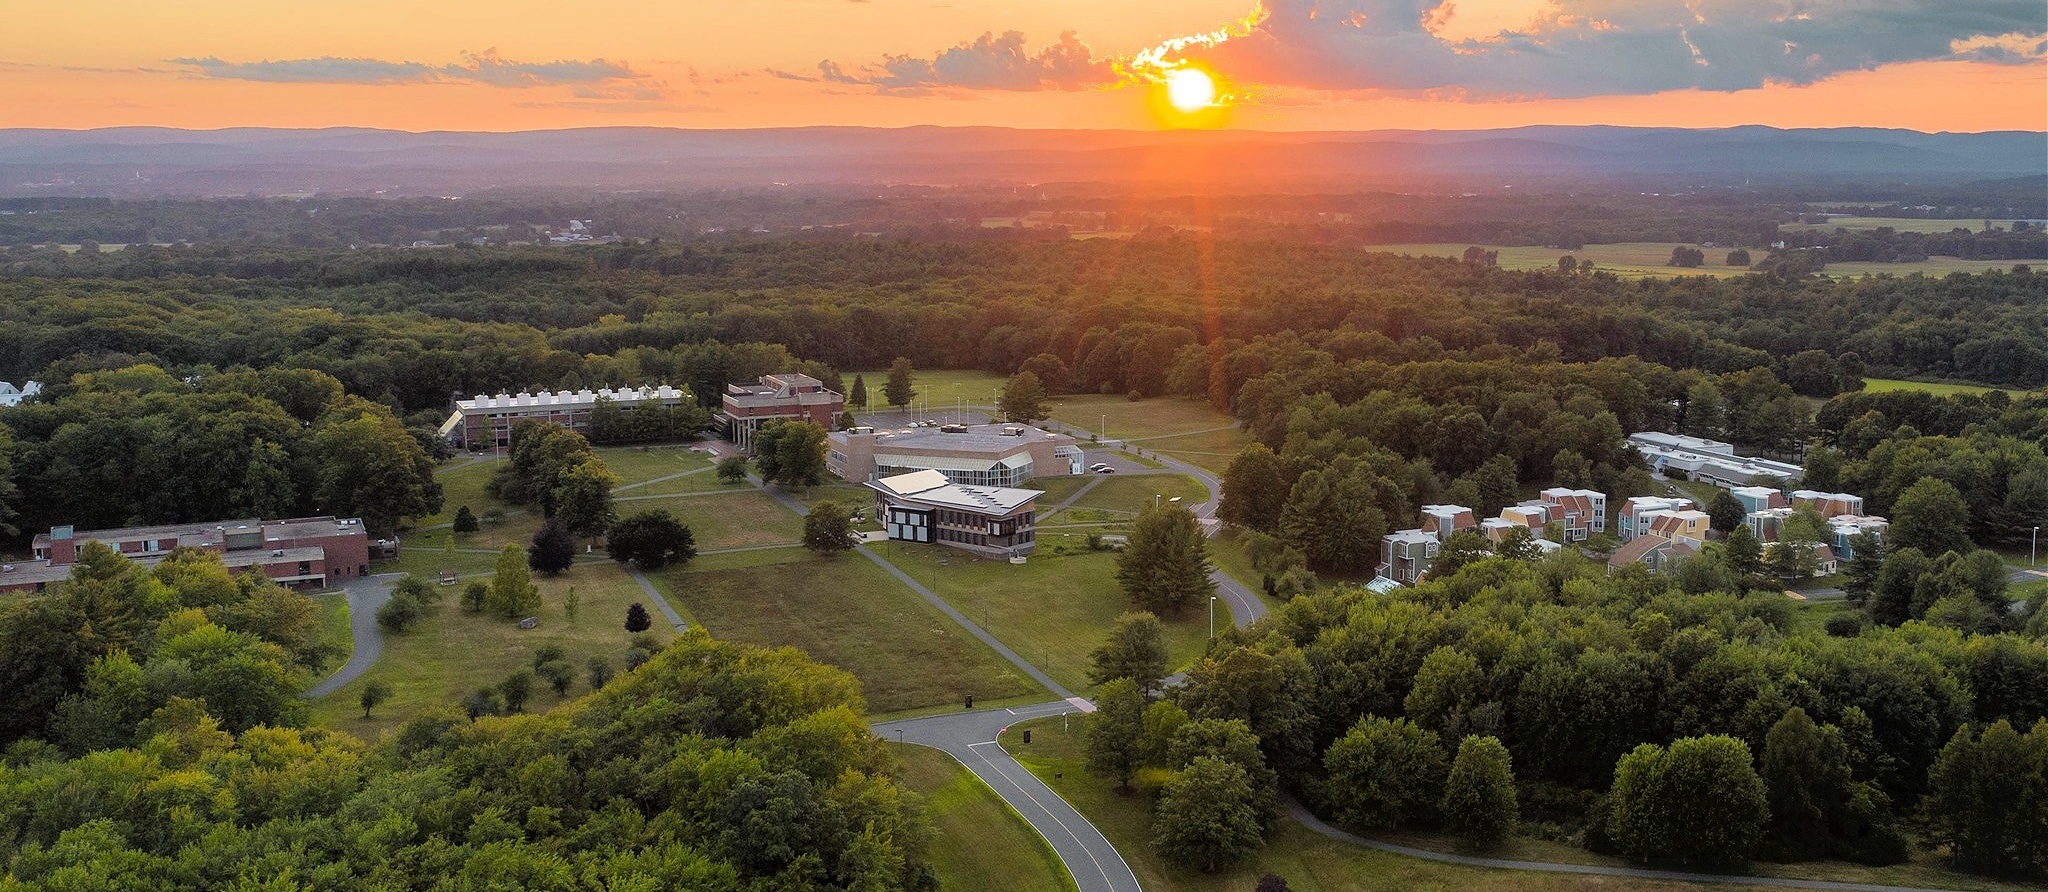 An aerial view of the Hampshire college campus at sunset